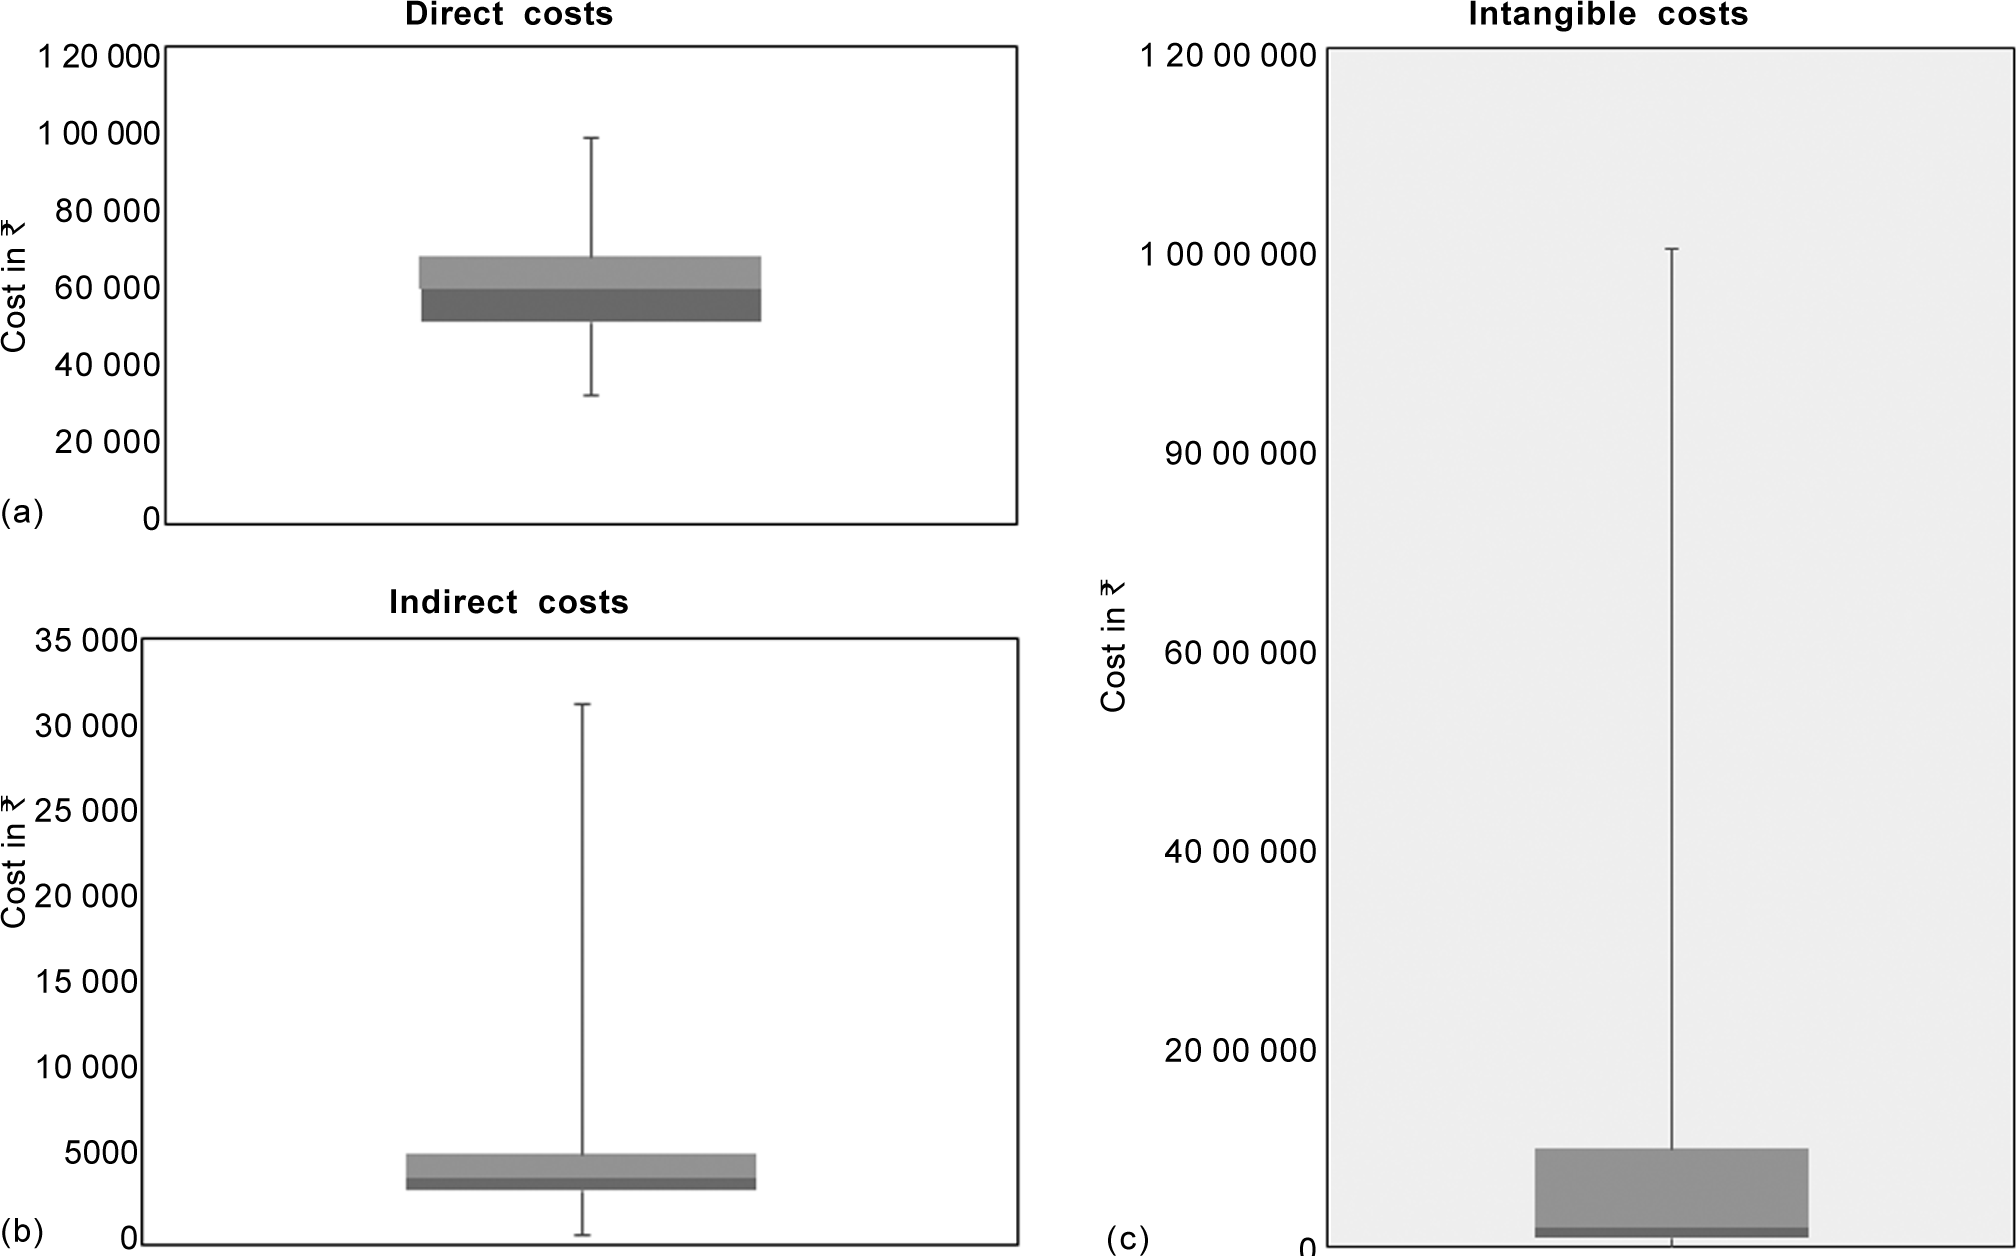 Box and whisker plot showing median, interquartile and minimum and maximum values, (a) direct costs, (b) indirect costs and (c) intangible costs